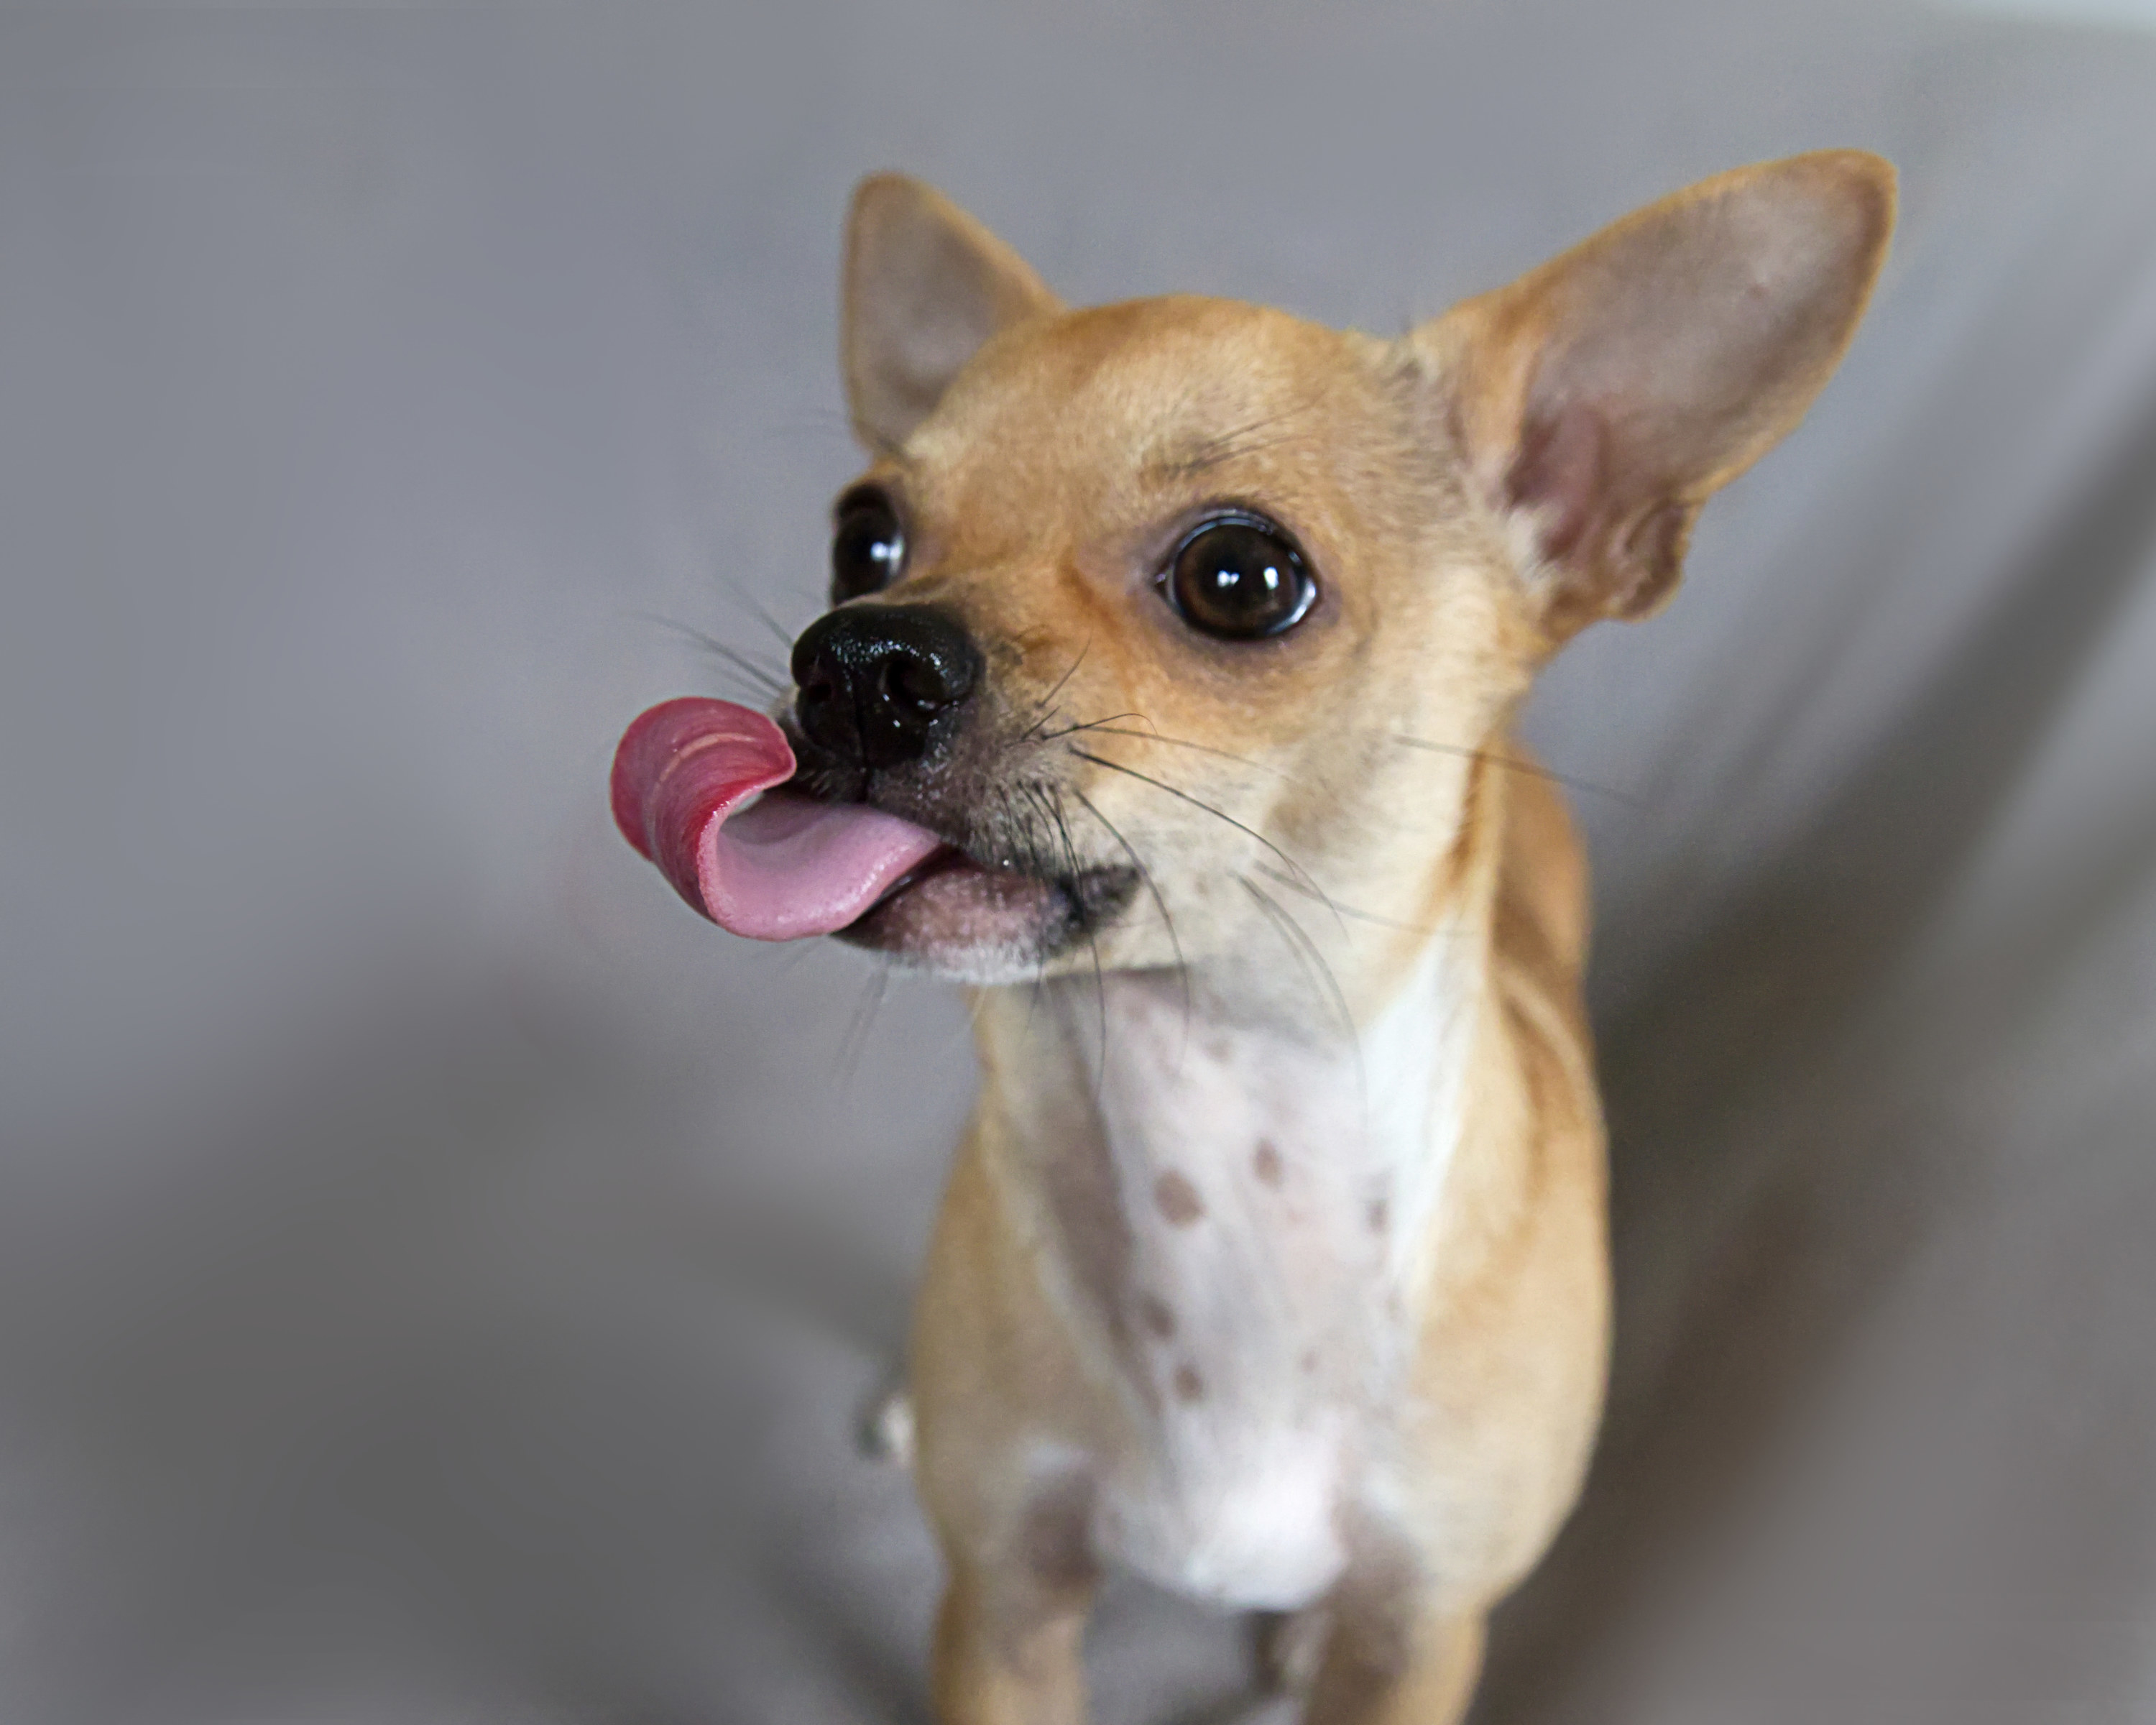 a small dog sticking its tongue out